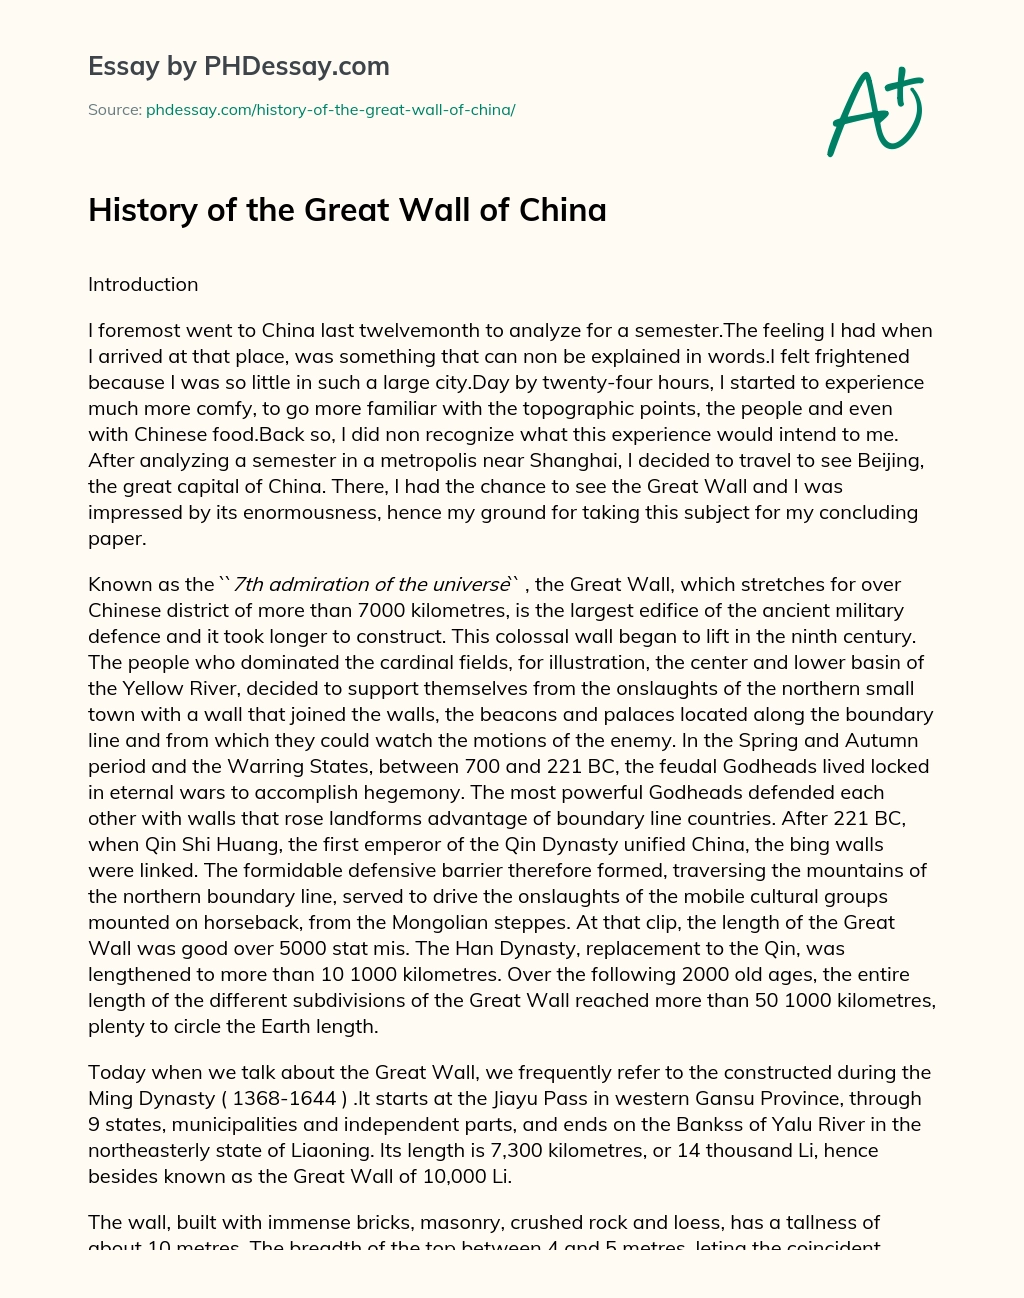 History of the Great Wall of China essay